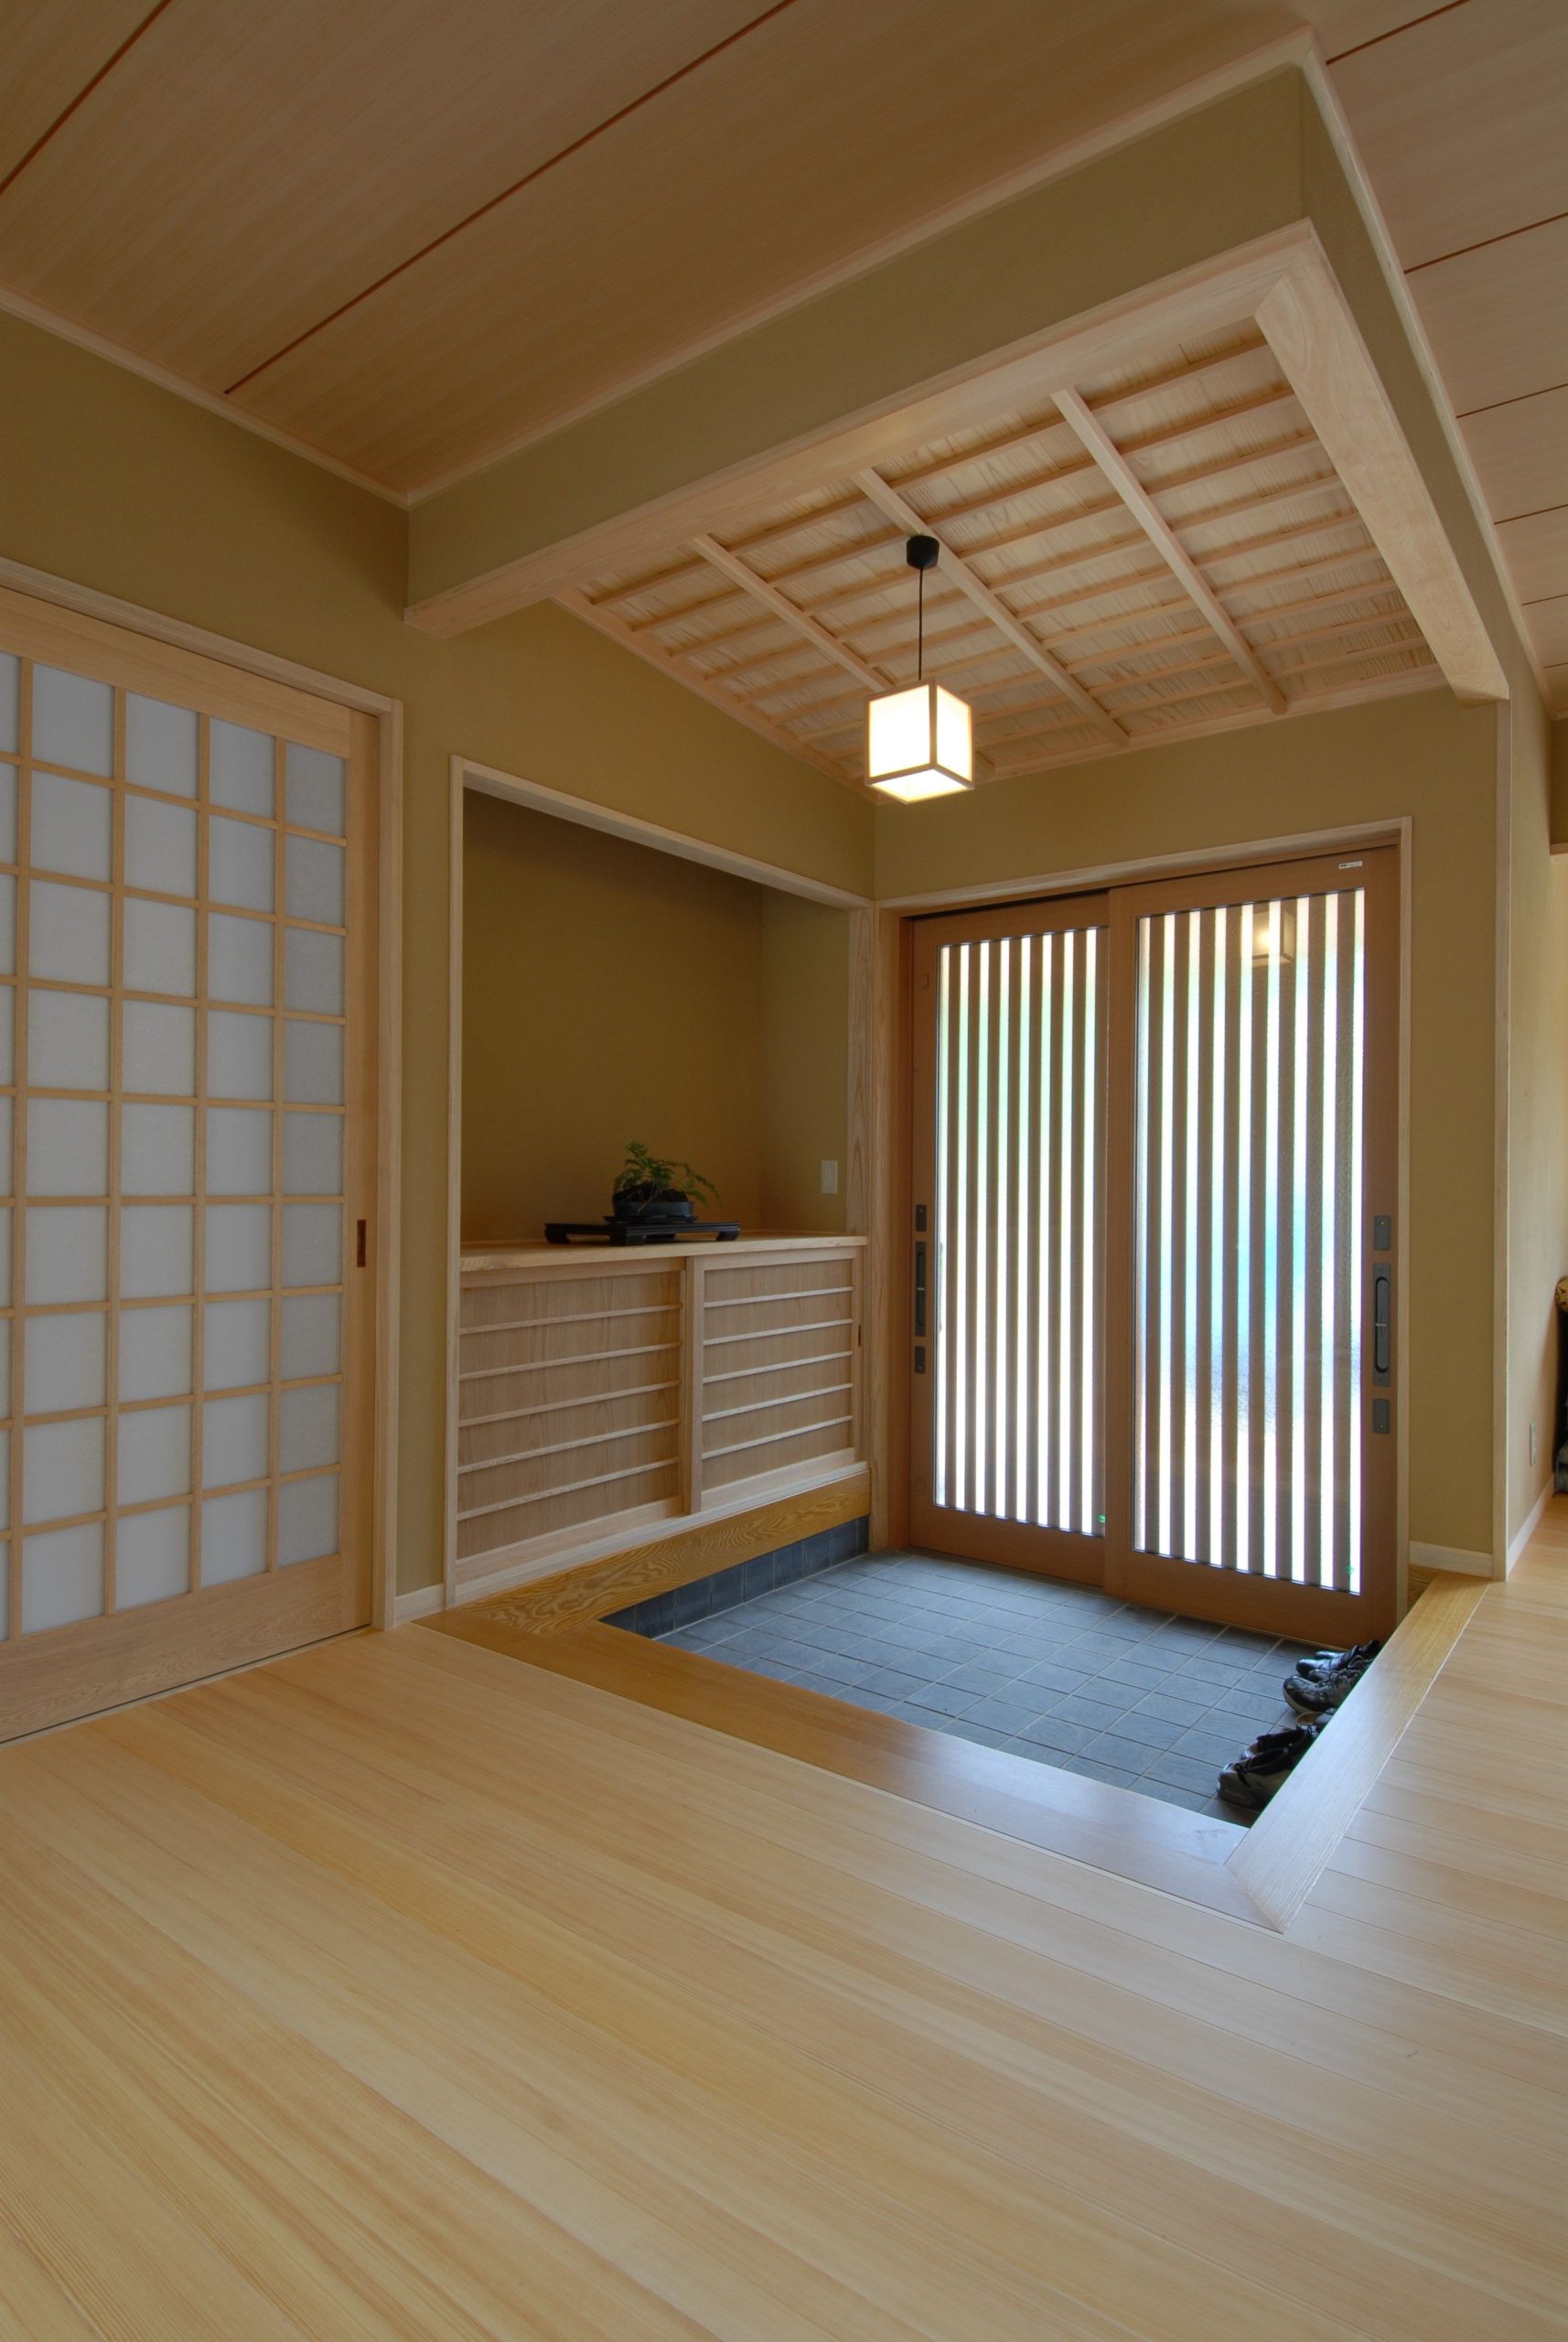 Applying a Minimalist Design to Decorate a Japanese Entrance